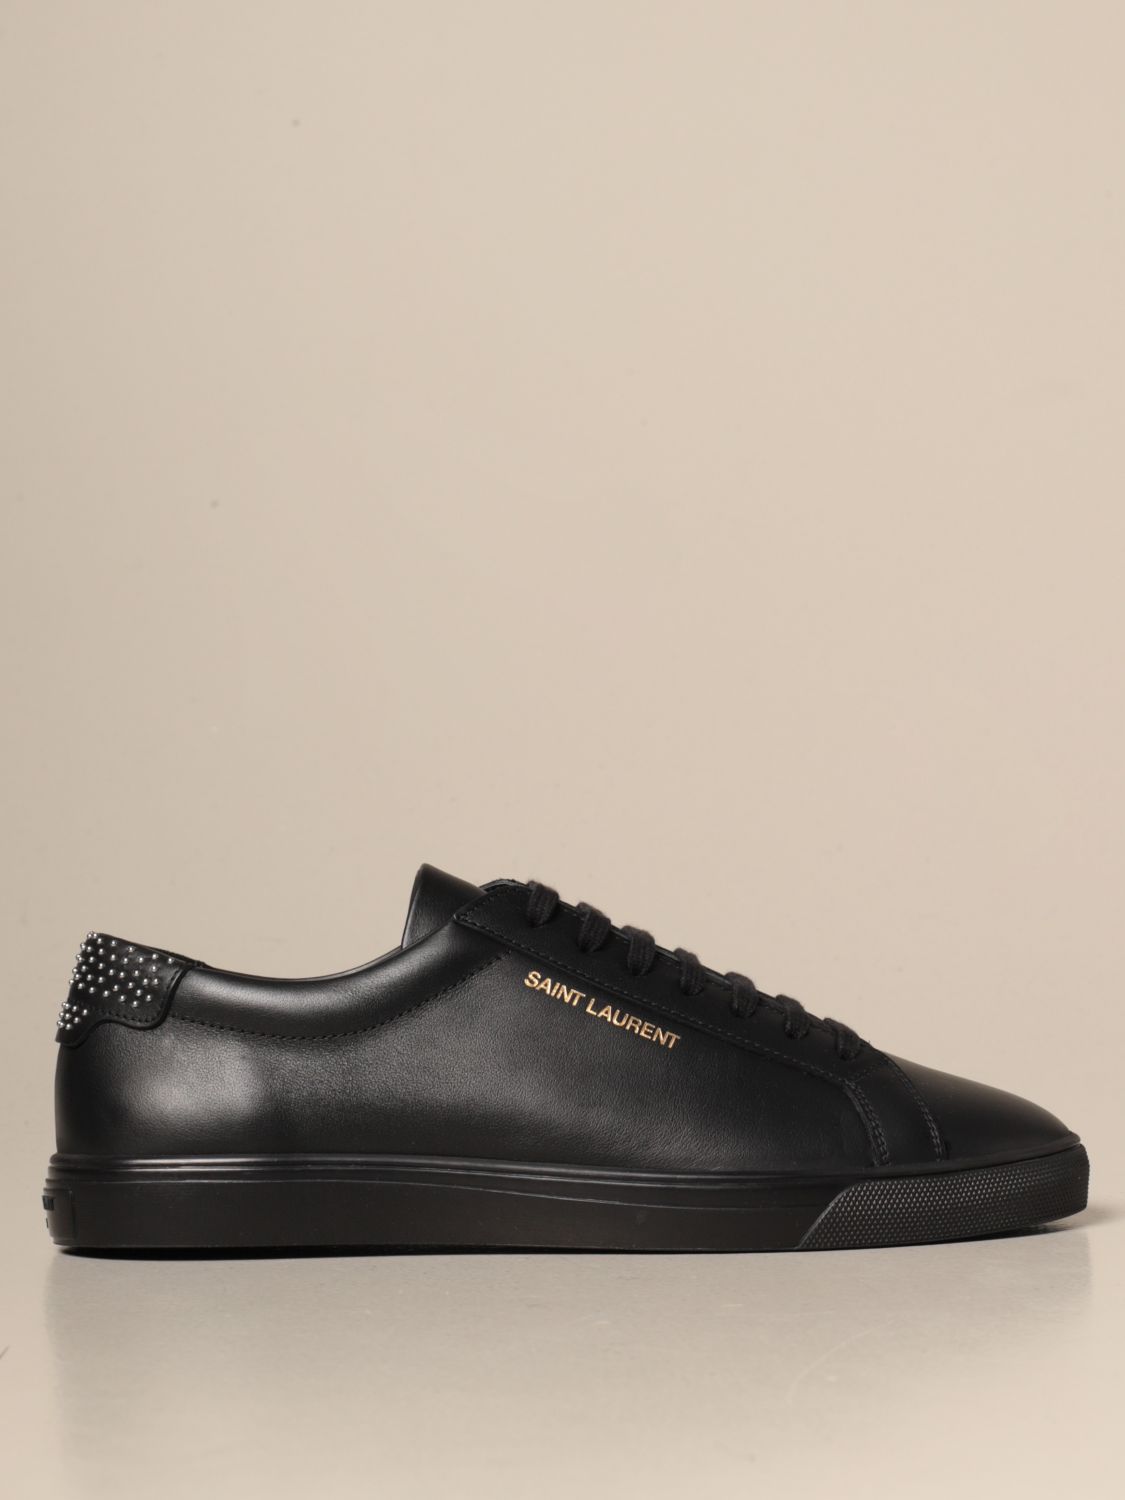 Andy low top Saint Laurent sneakers in leather